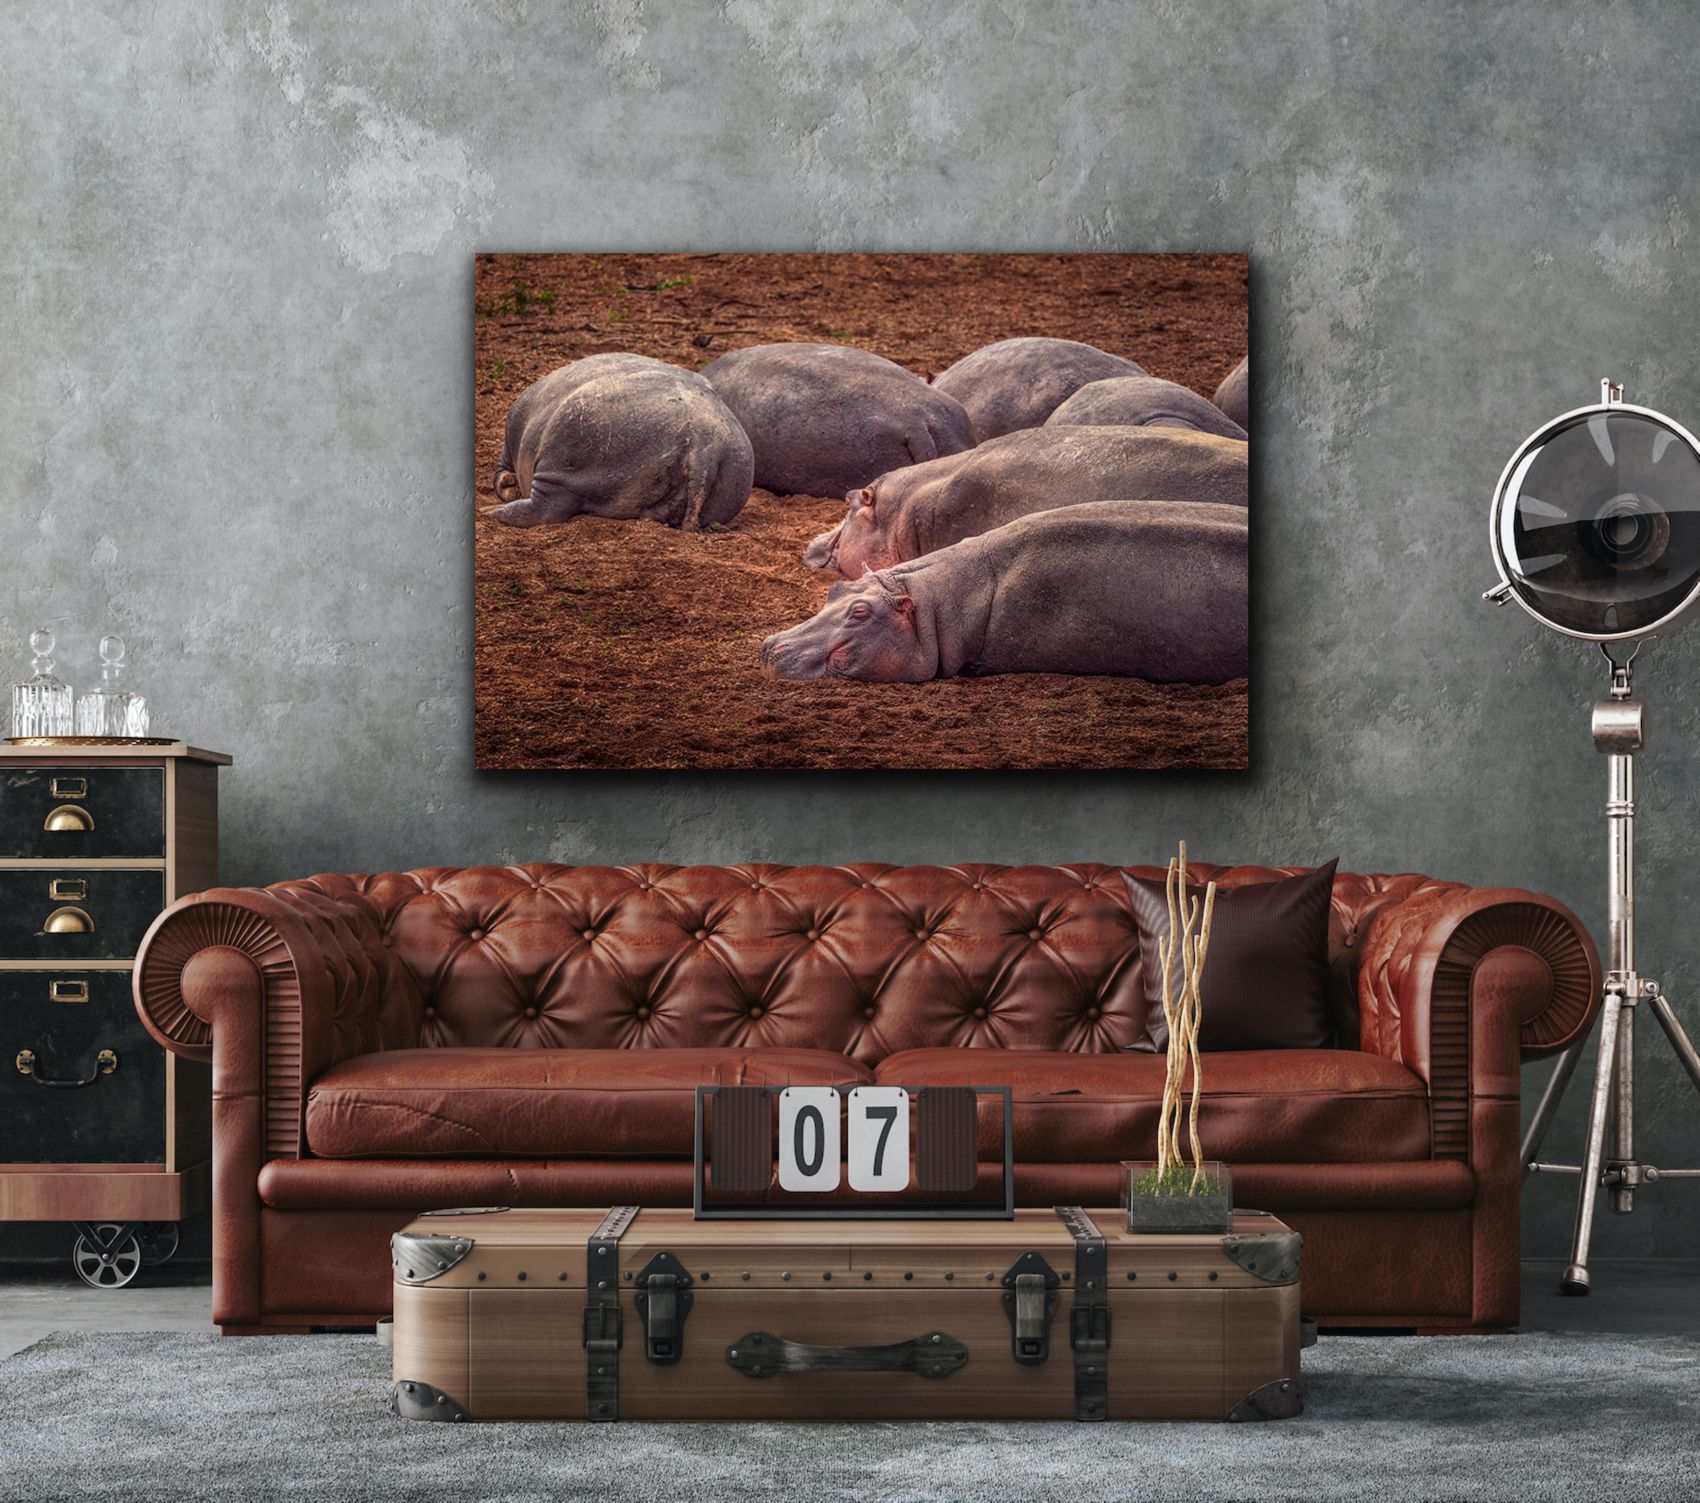 Example of image # Hippos GP BKT2324 on a wall in a home